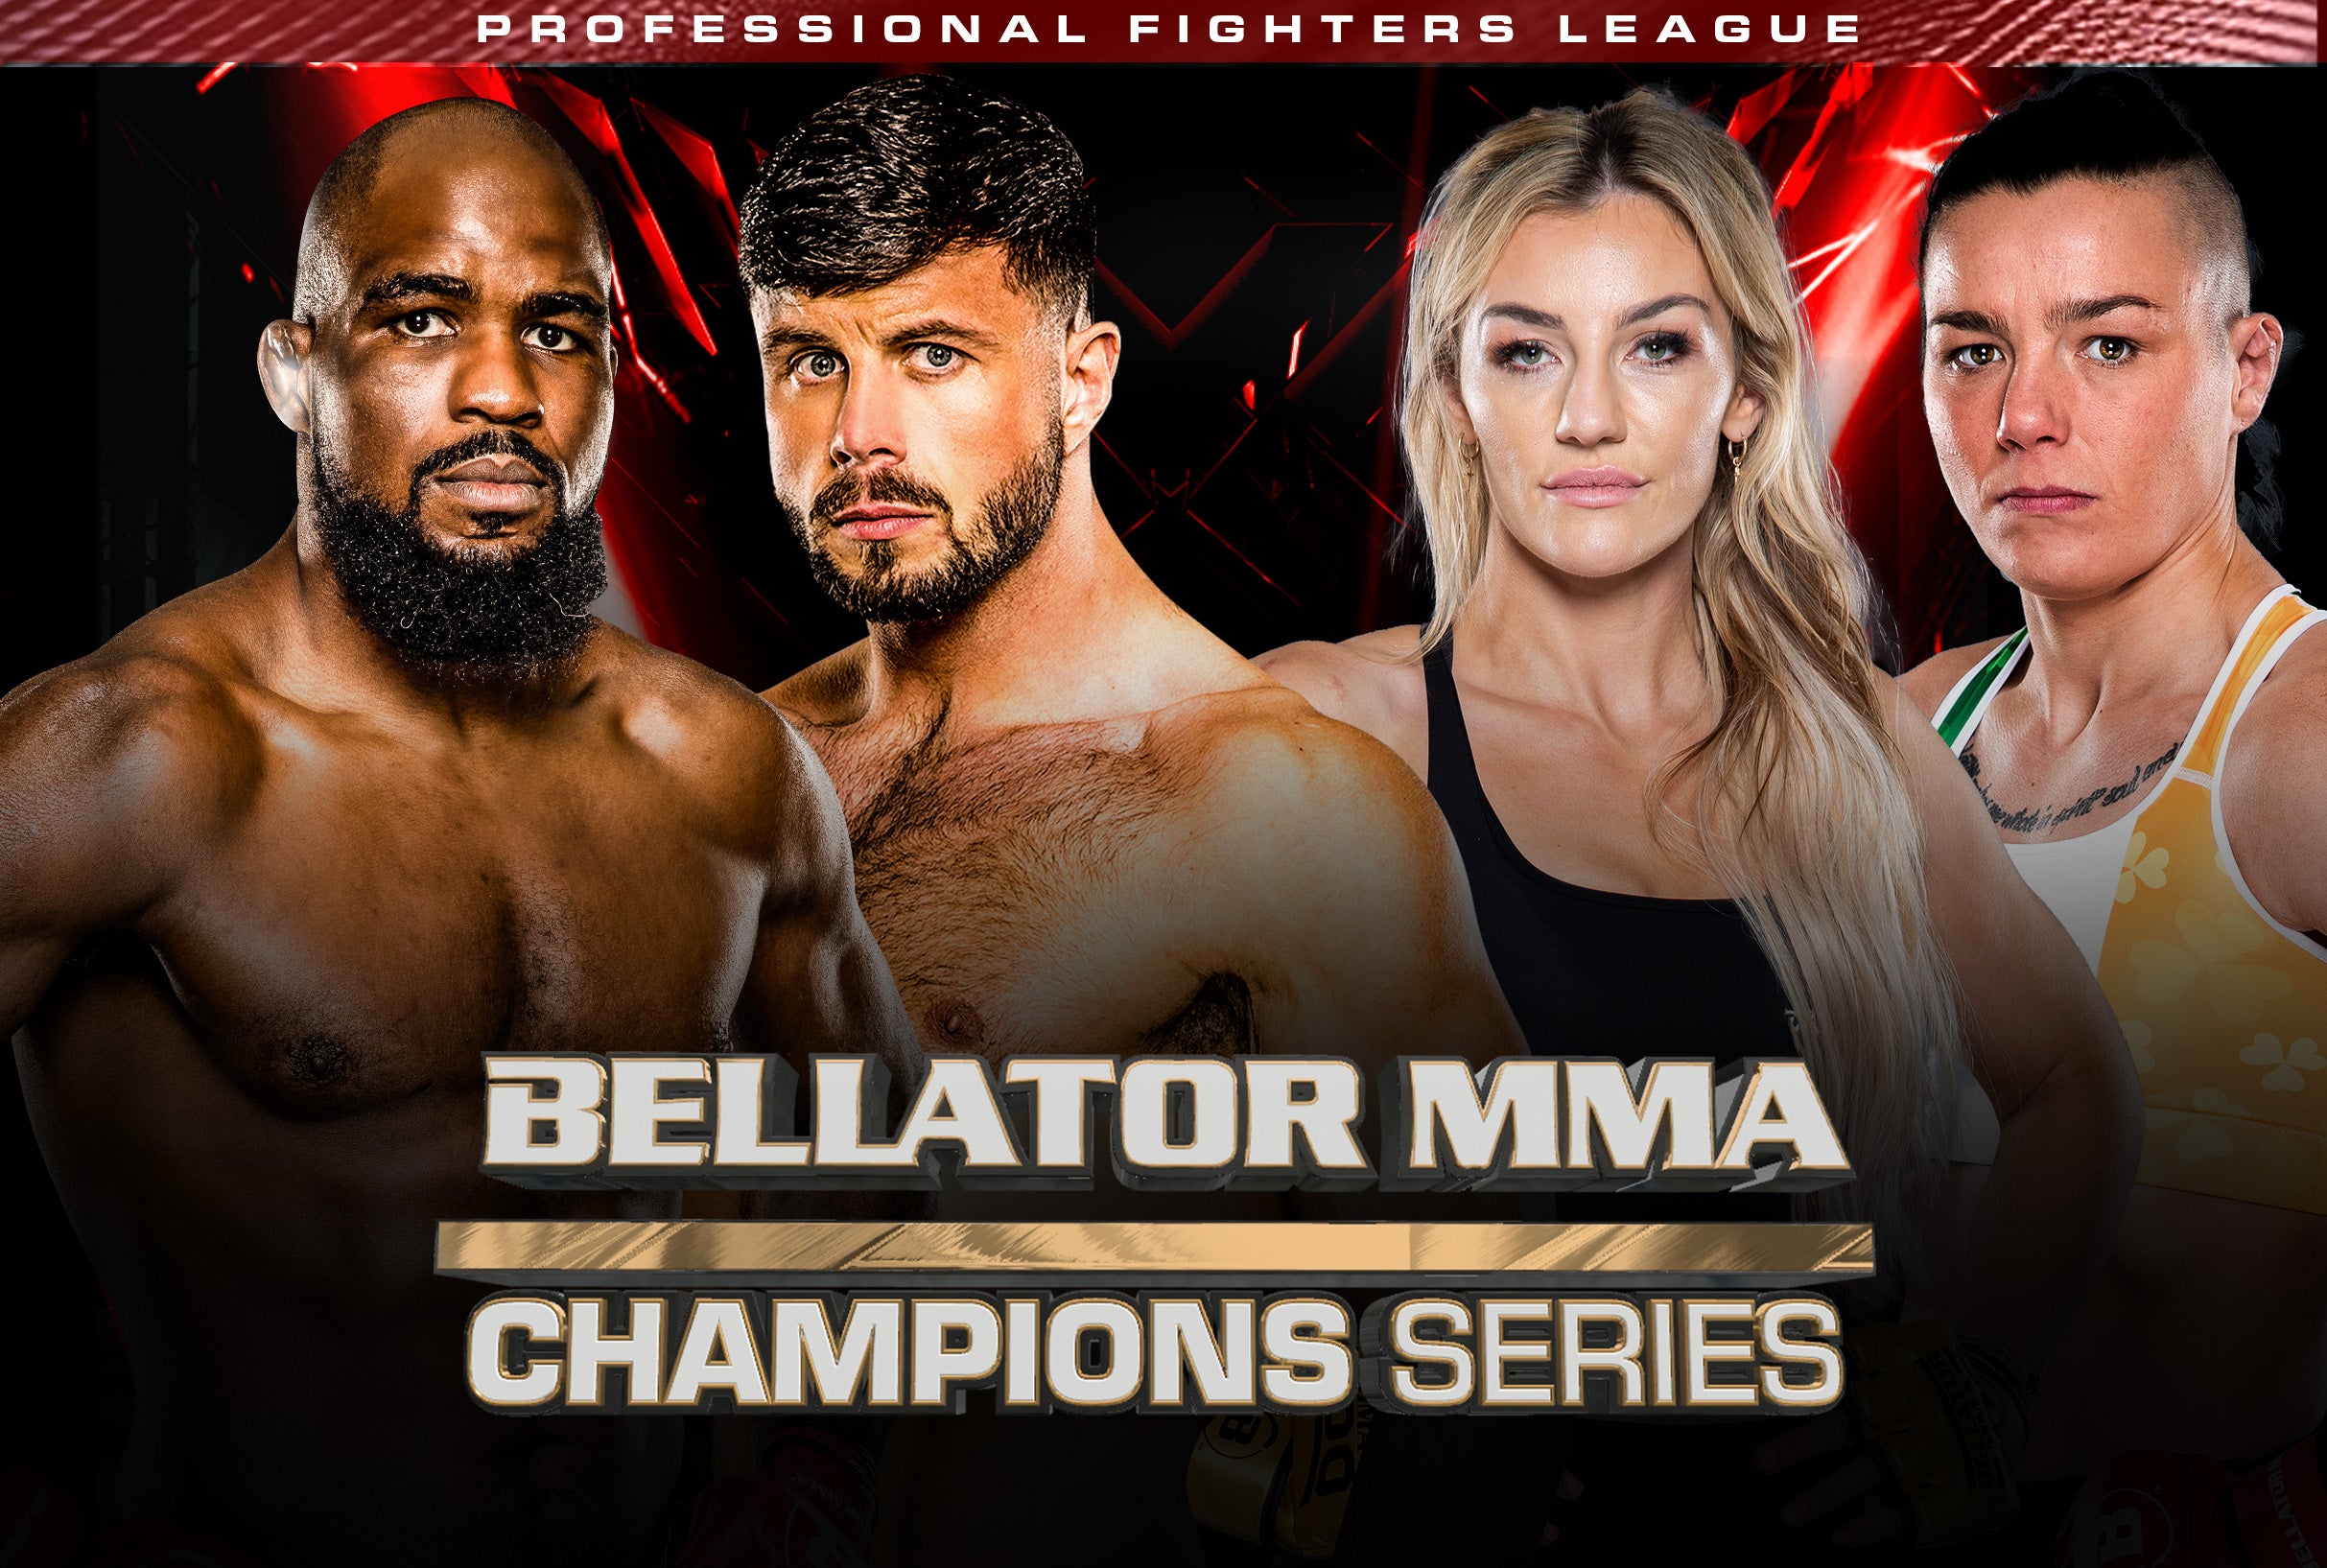 Bellator Champions Series in Belfast promo photo for Past Purchasers presale offer code